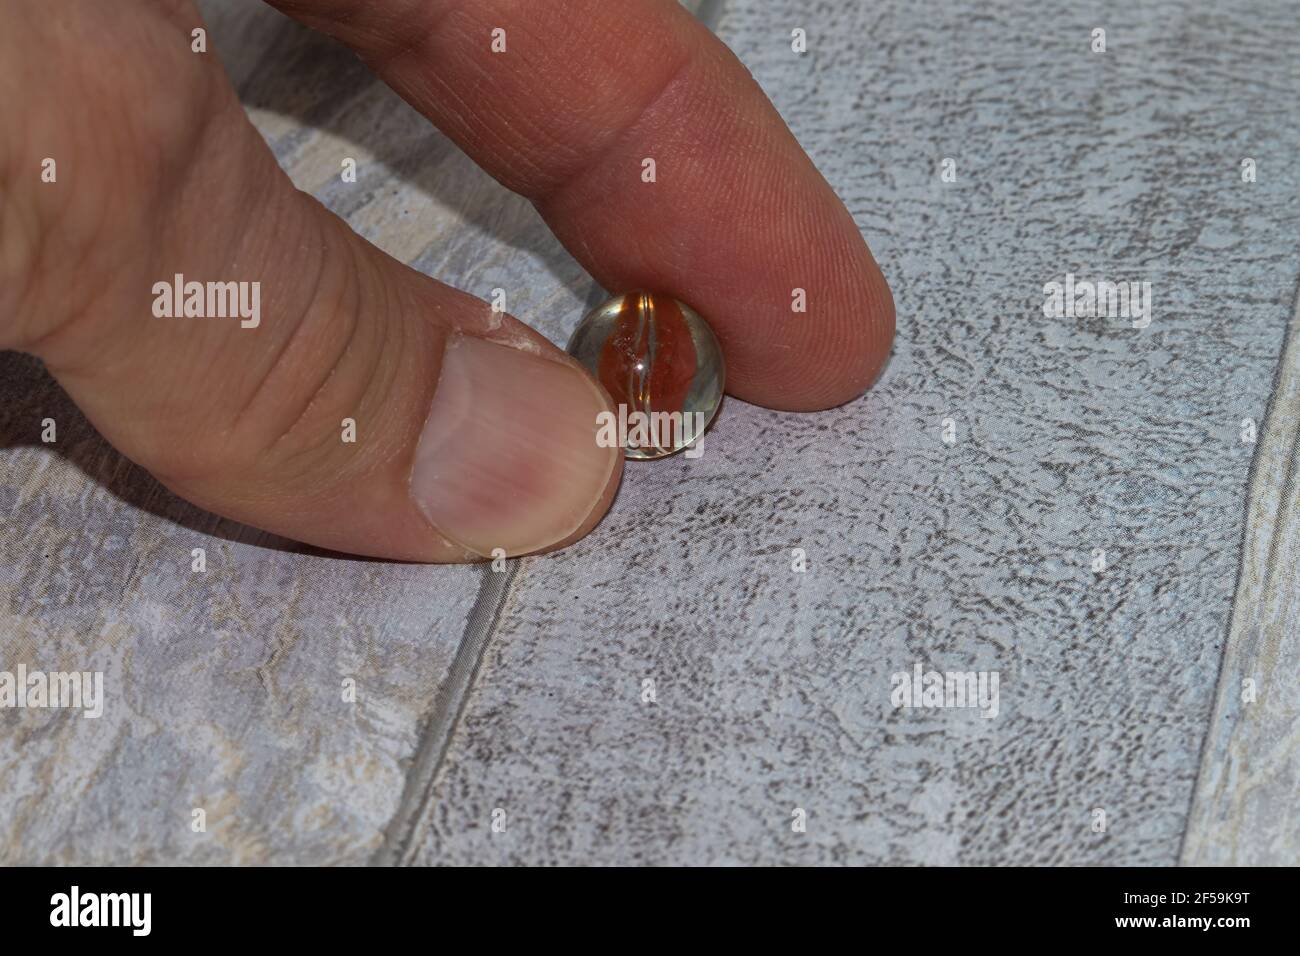 glass marble held by fingers on wooden background Stock Photo